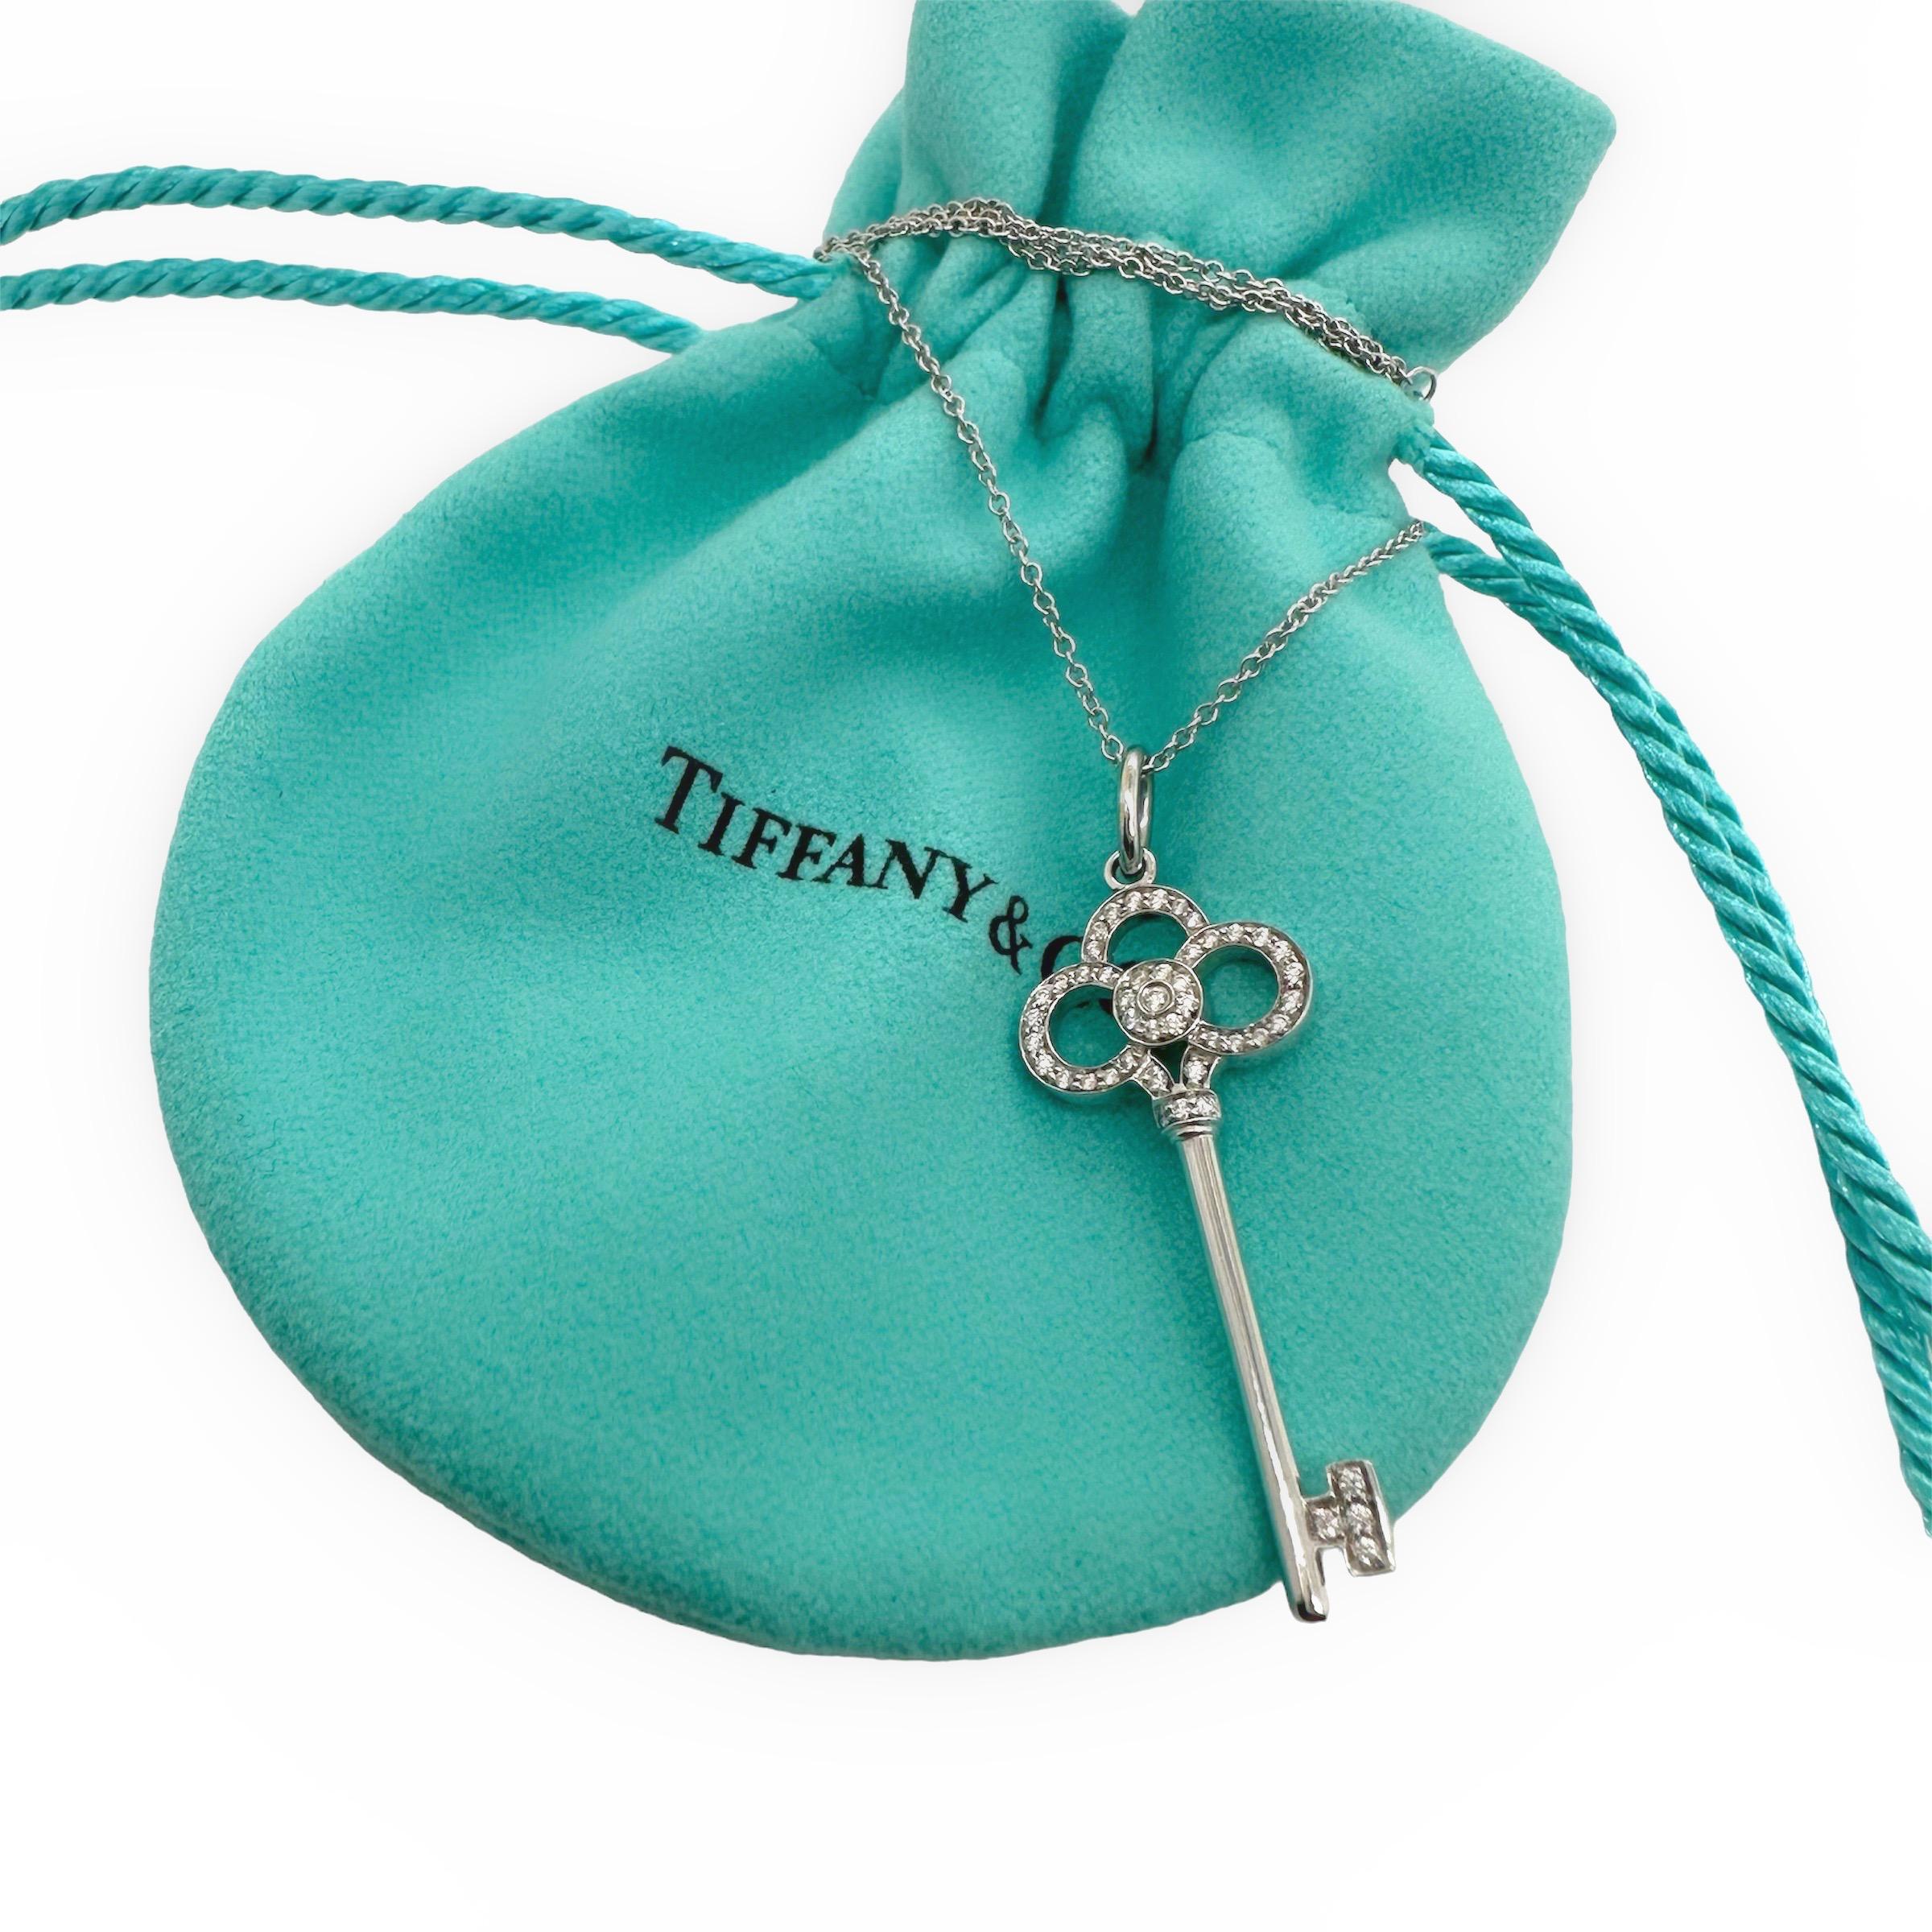 Tiffany & Co. Crown Key Diamond Pendant Necklace 18kt White Gold For Sale 8